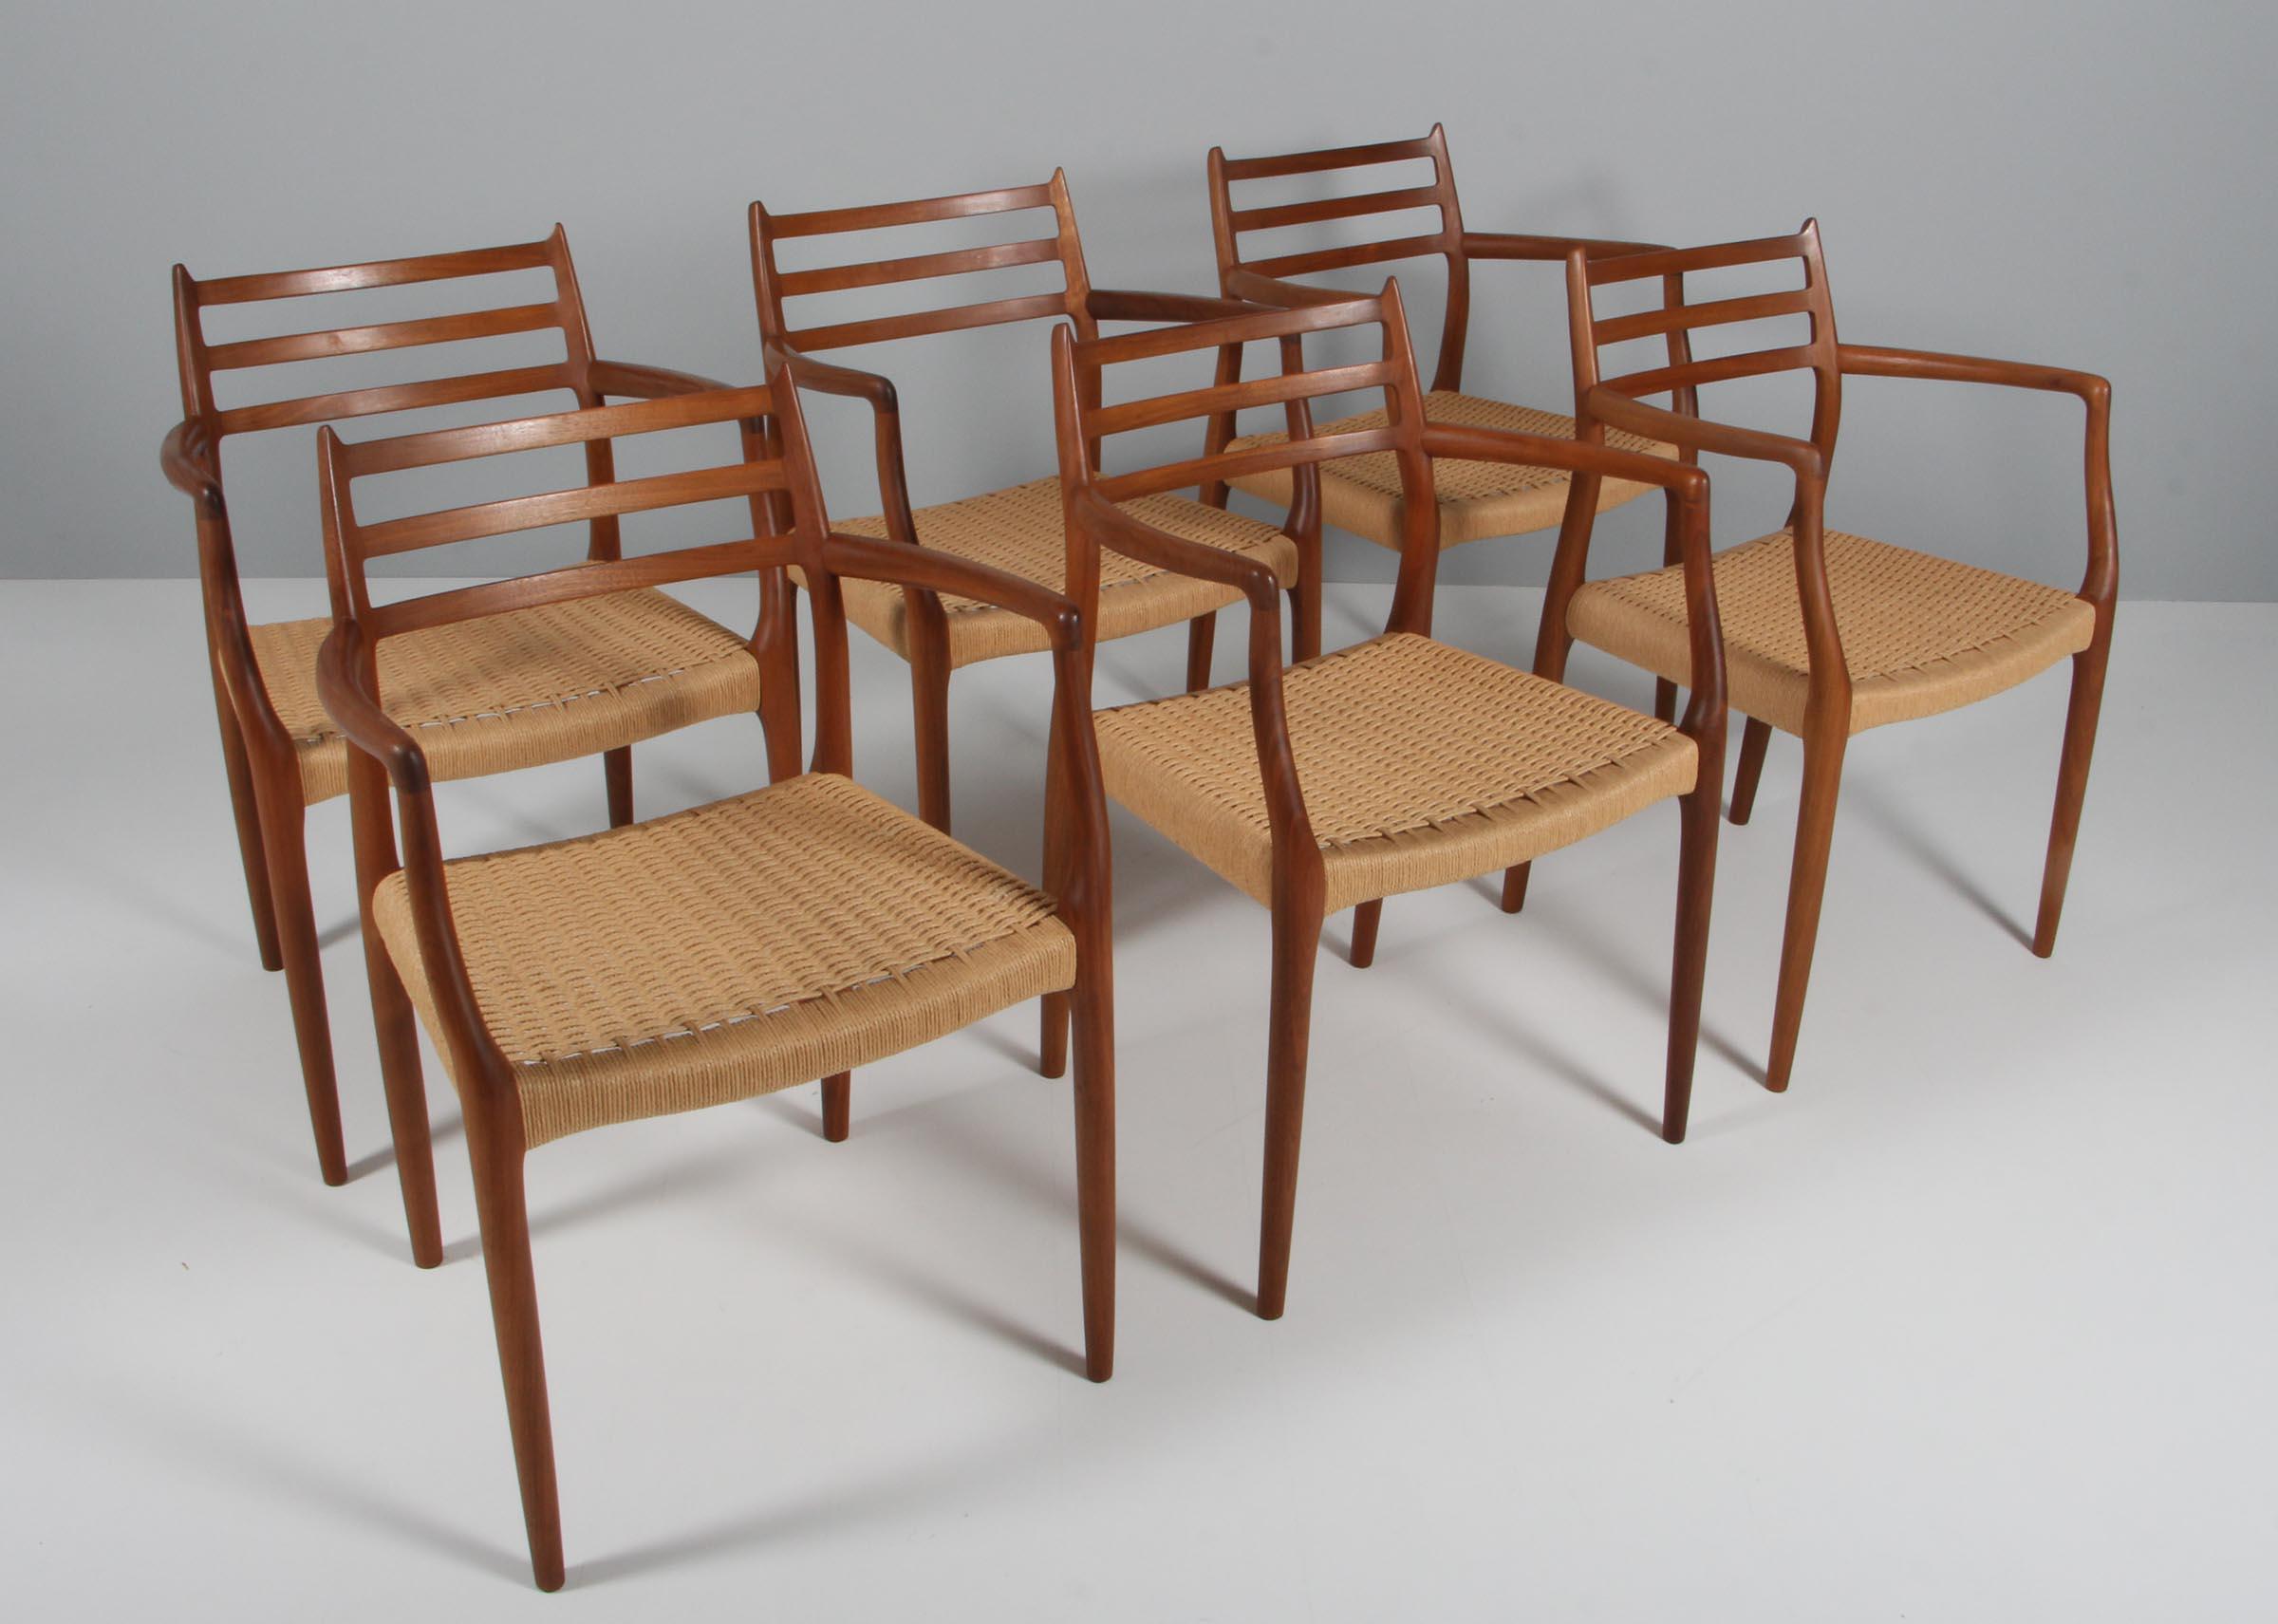 N. O. Møller set of six armchairs with frame of solid walnut.

Seat with papercord.

Model 62, made by J. L. Møller, Denmark.